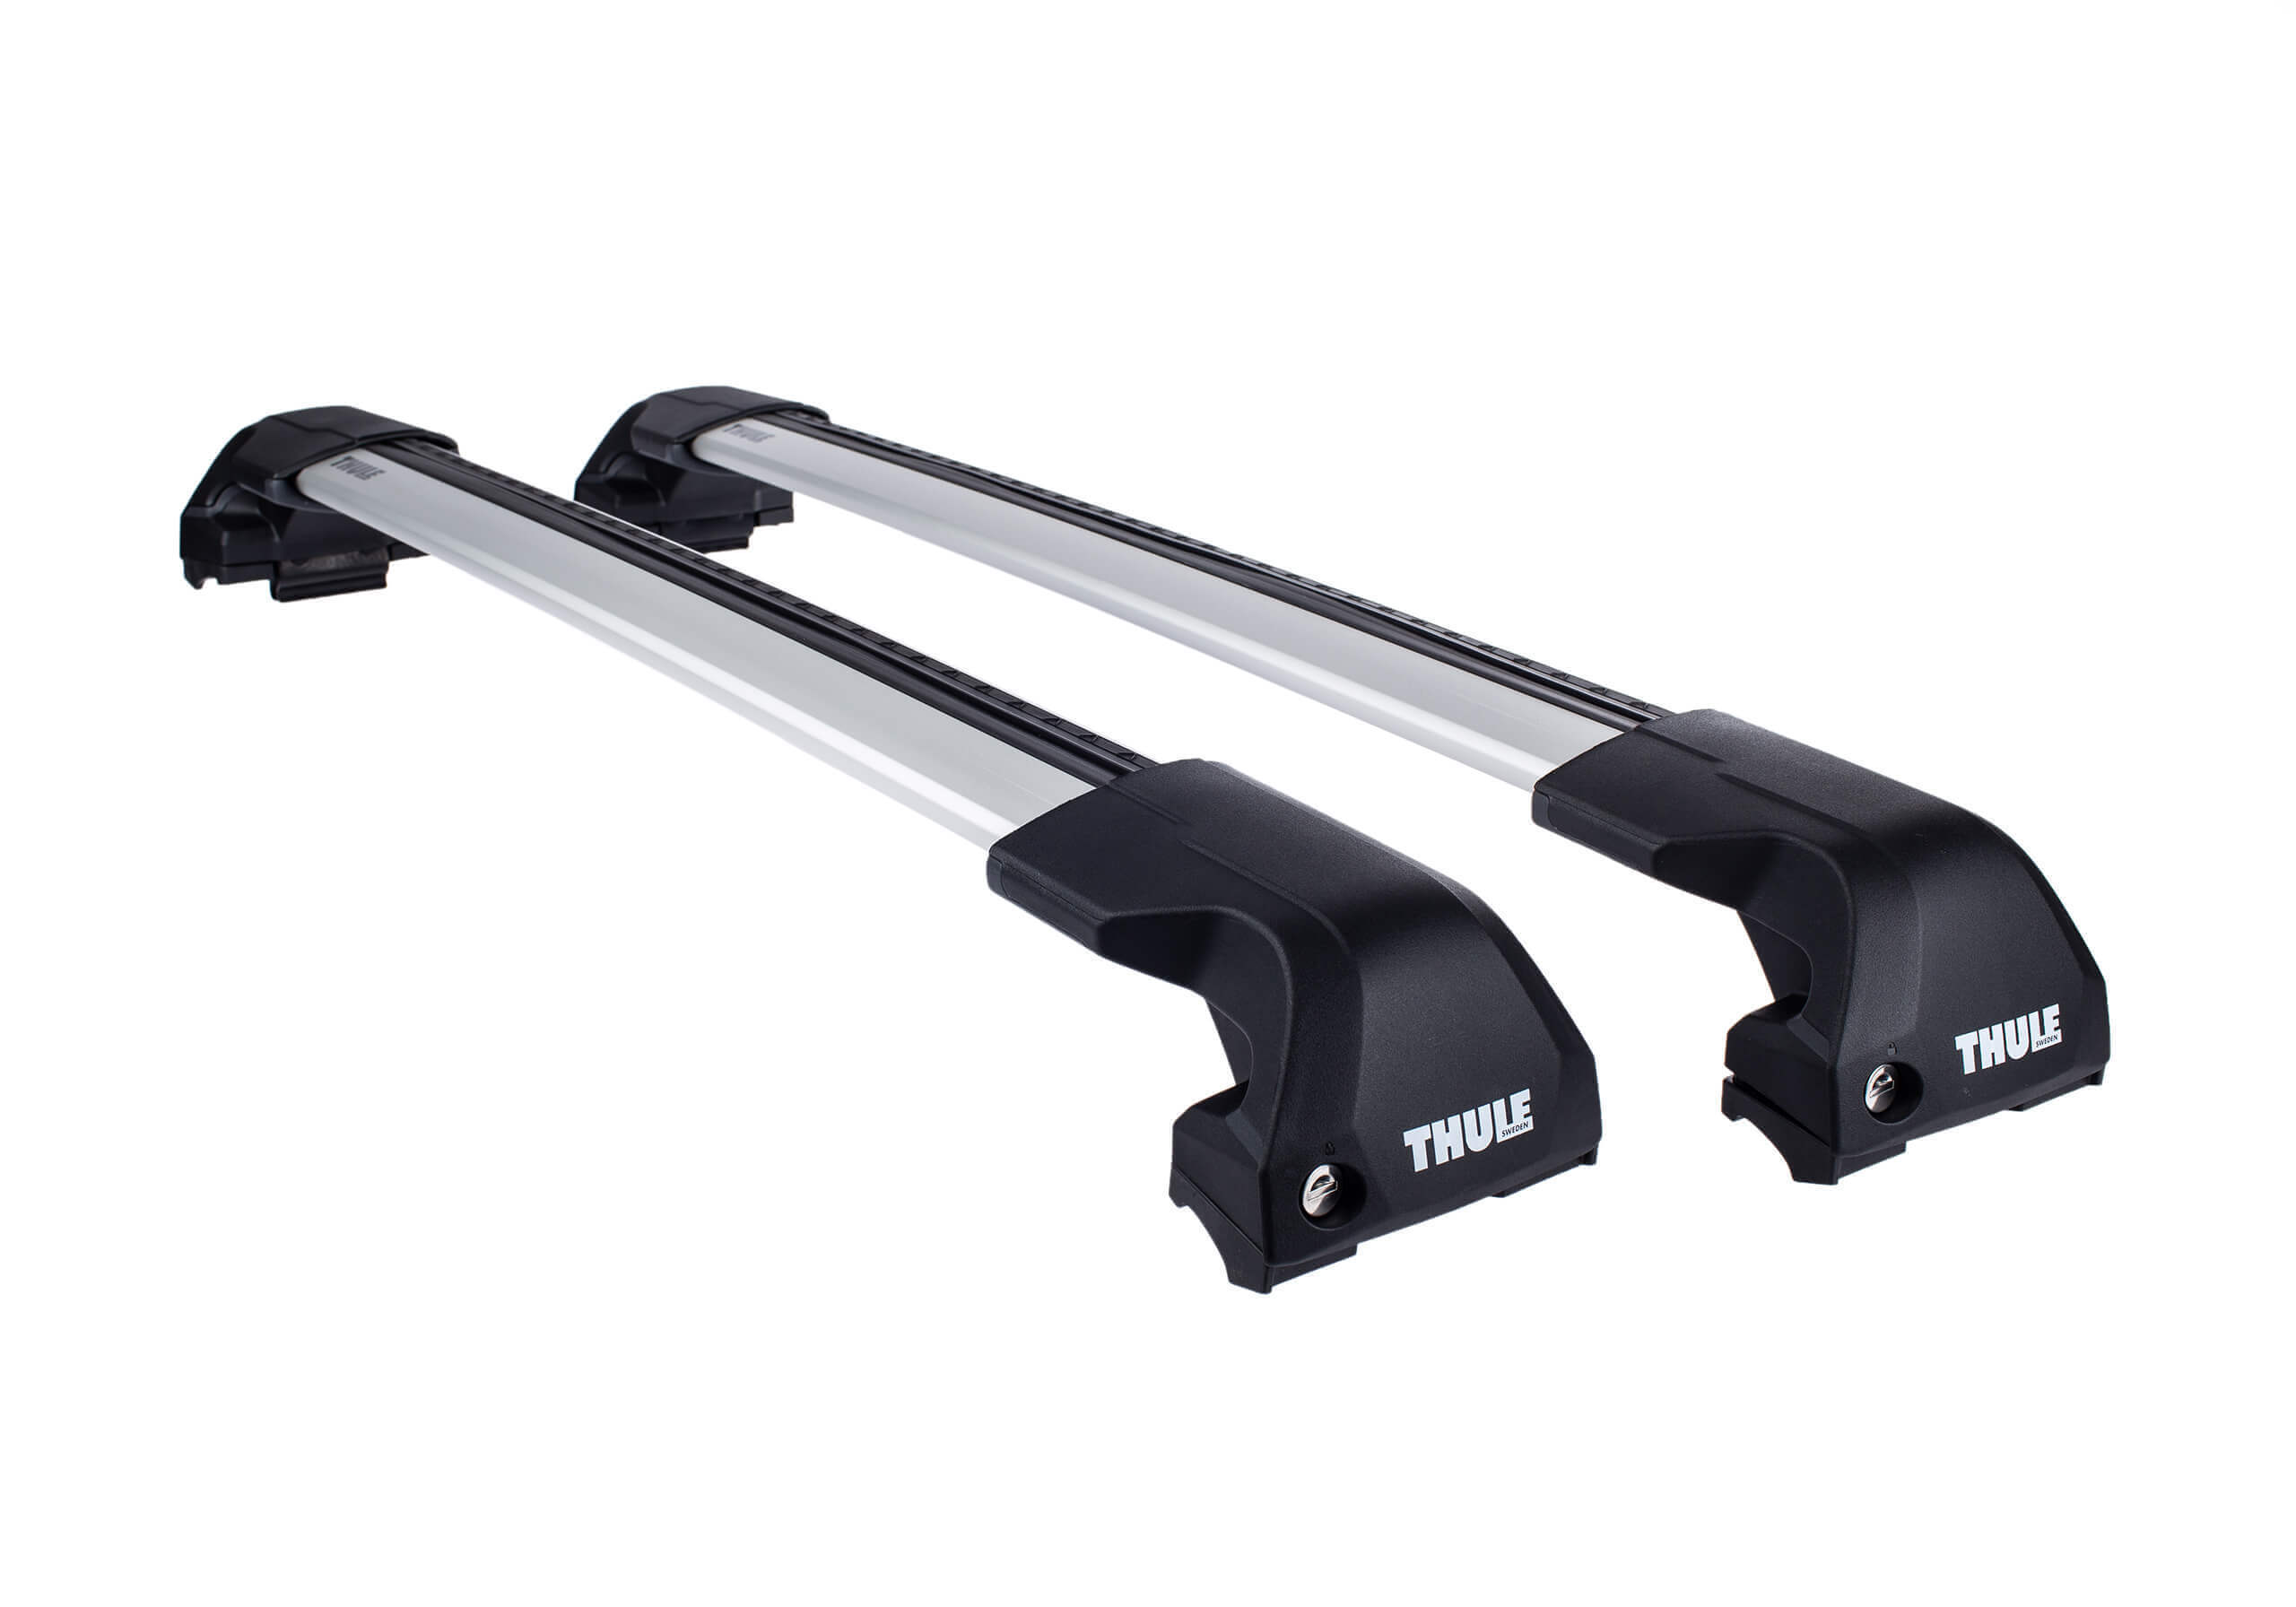 BMW 3 series Touring (2012 to 2019):Thule Edge silver WingBars package - 7206, 7213 x 2, 6007